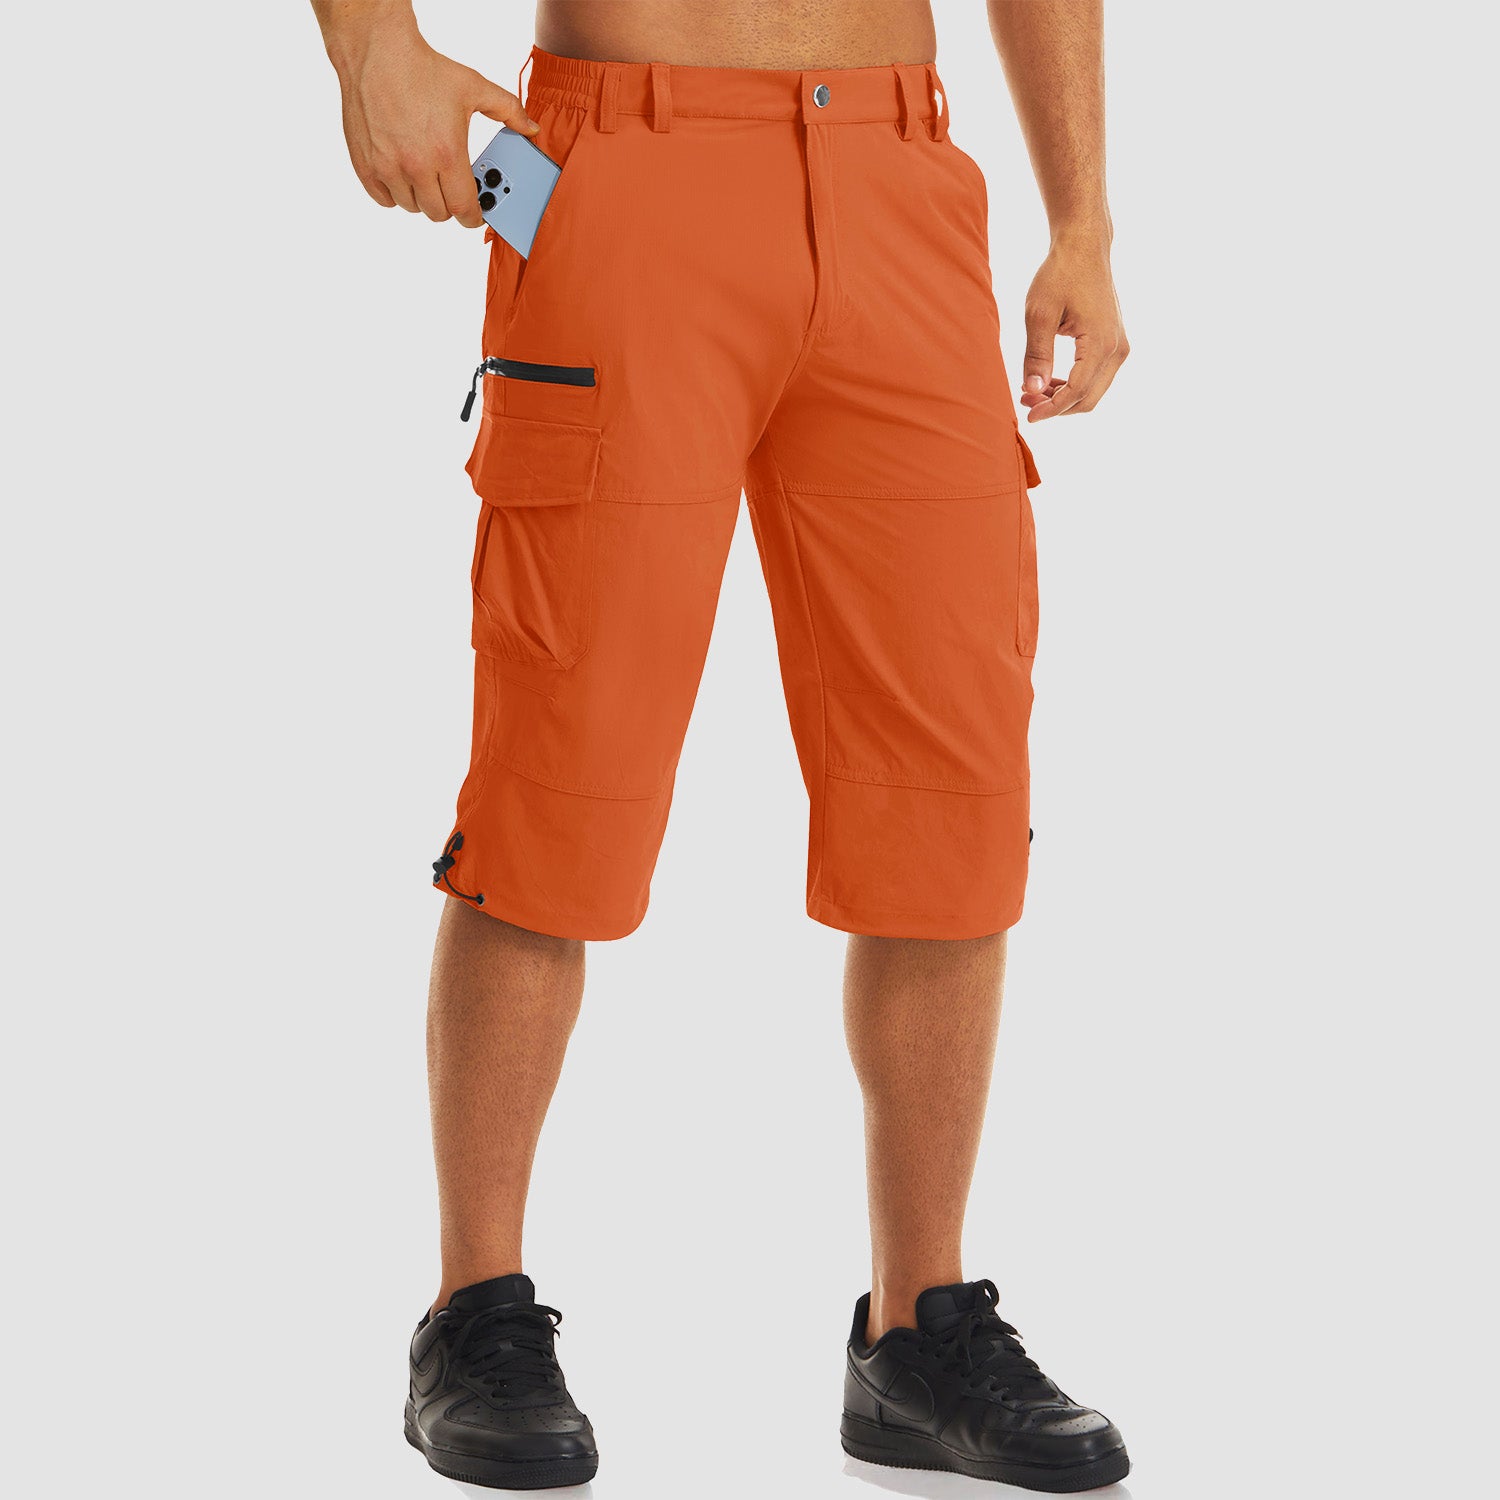 Buy 4 Get the 4th Free！】Men's Workout Gym Shorts with 7 Pockets Quick –  MAGCOMSEN